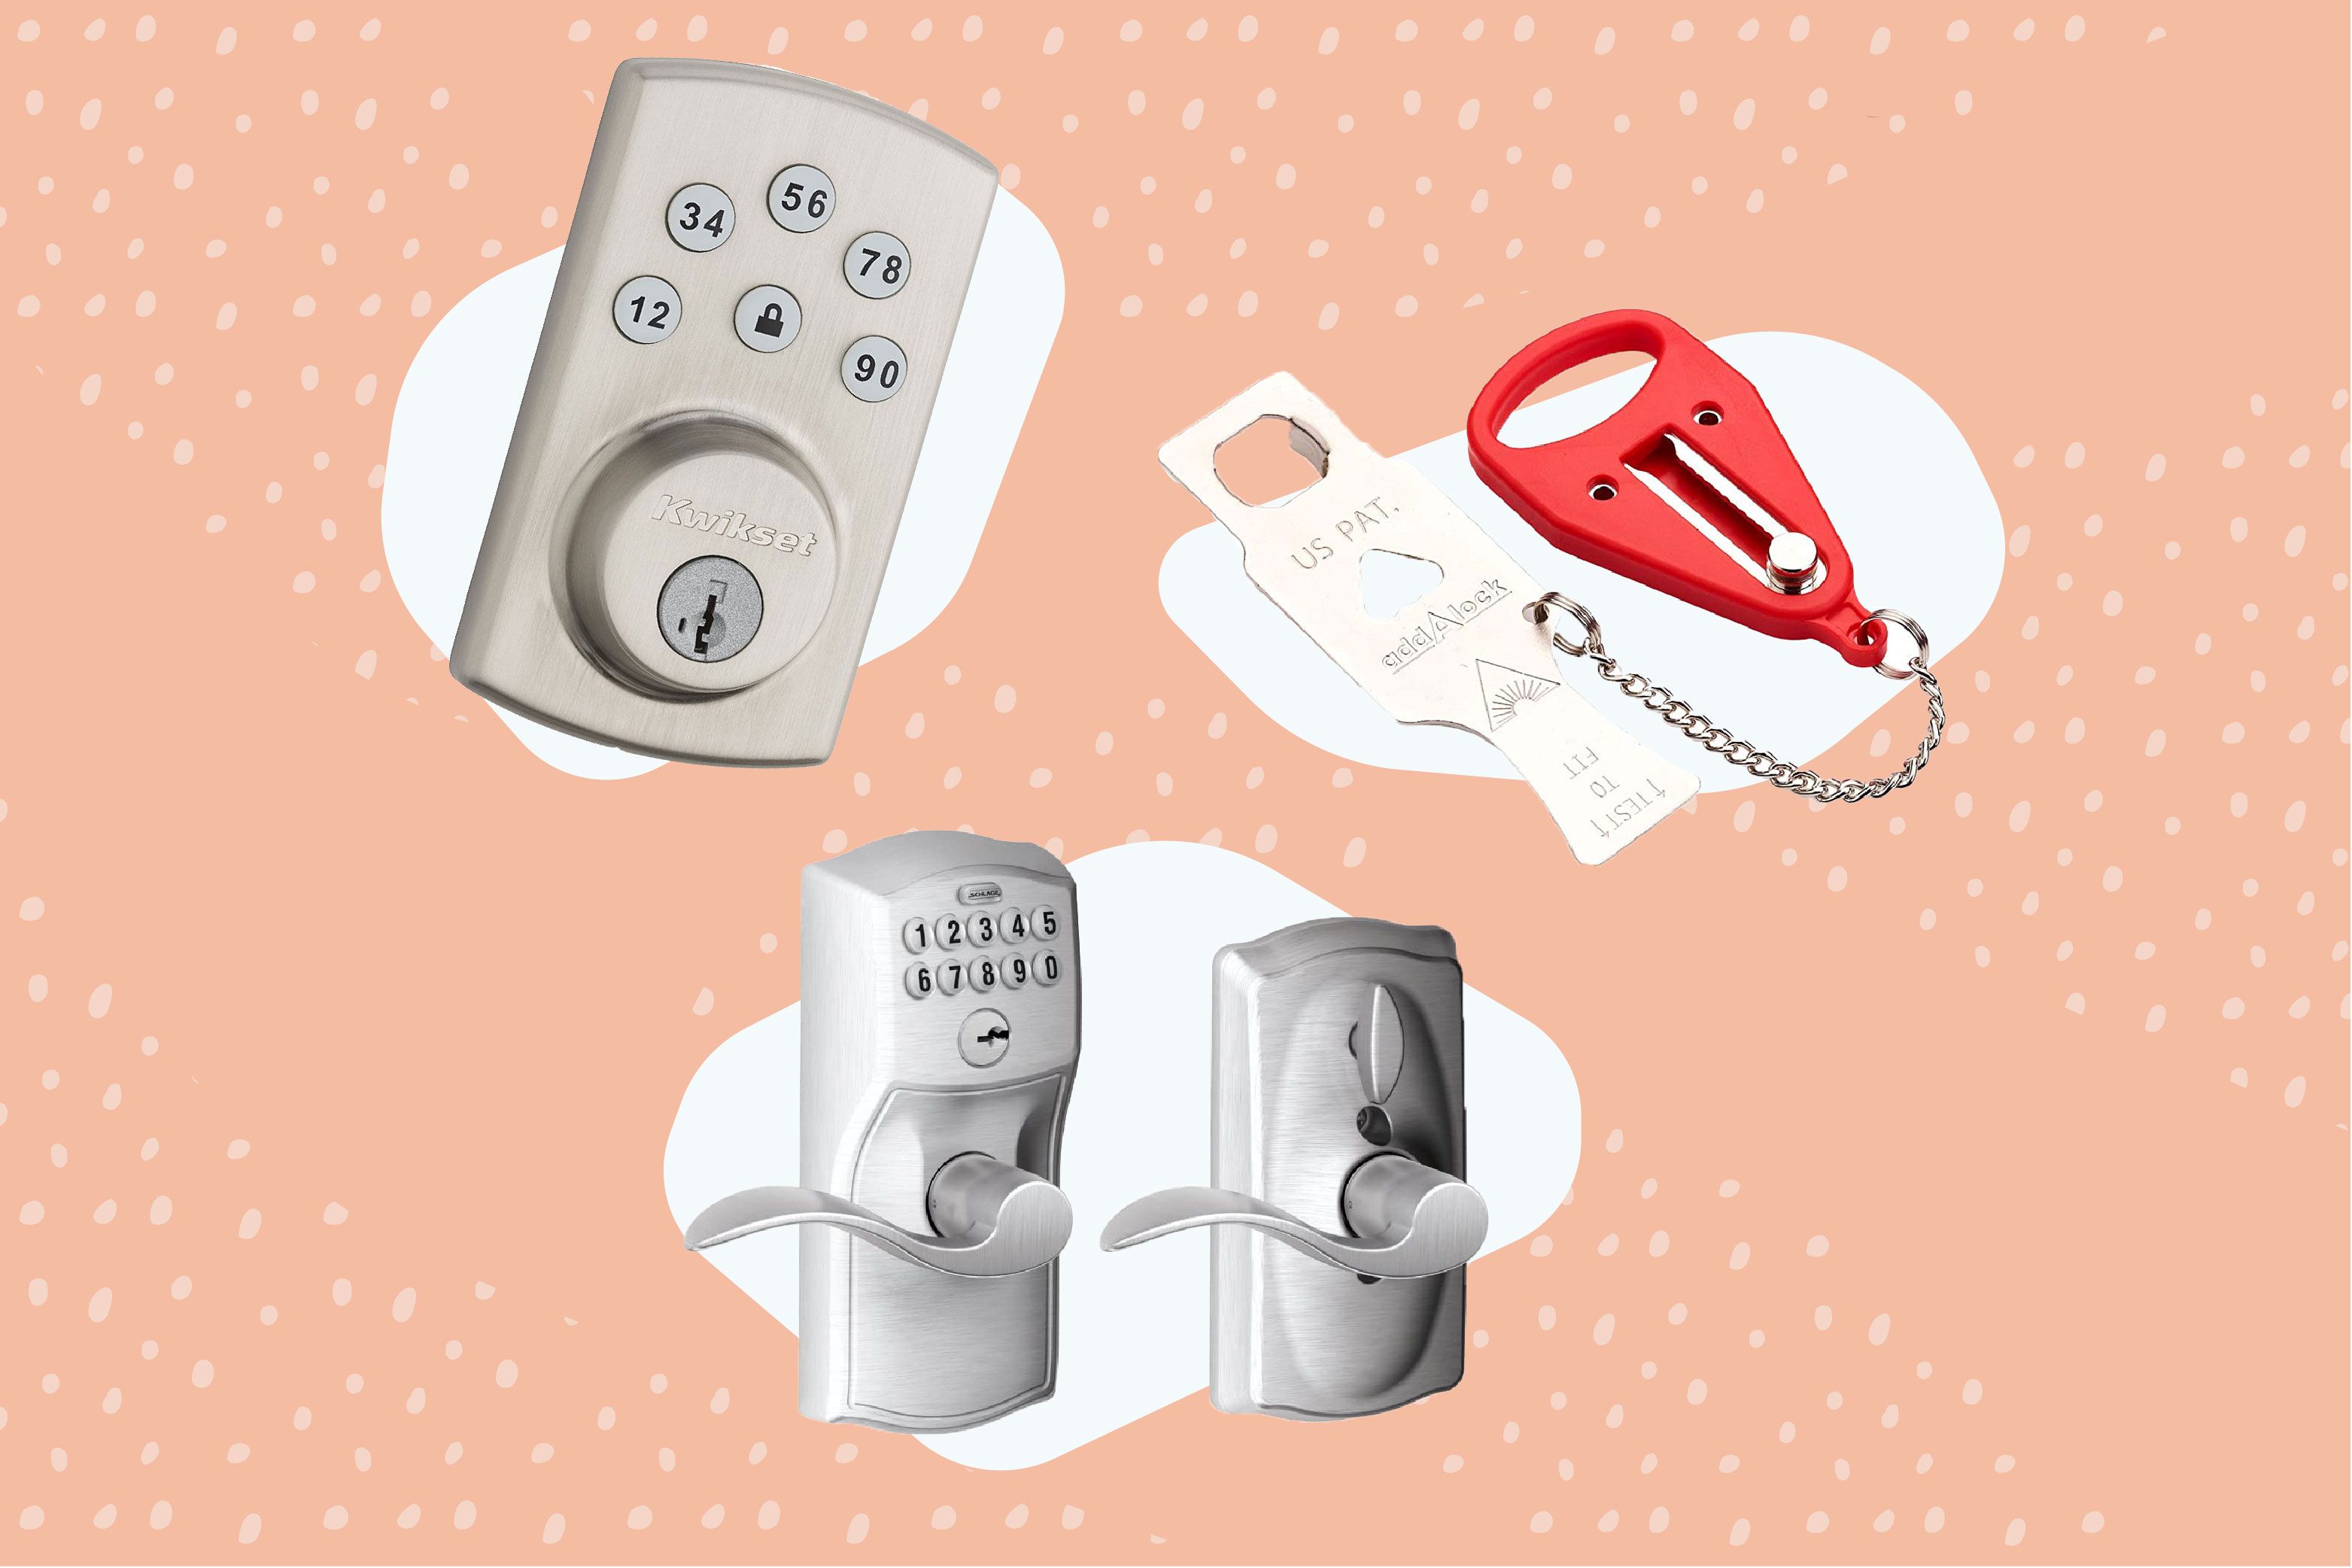 The Best Door Locks to Keep Your Home Safe and Secure